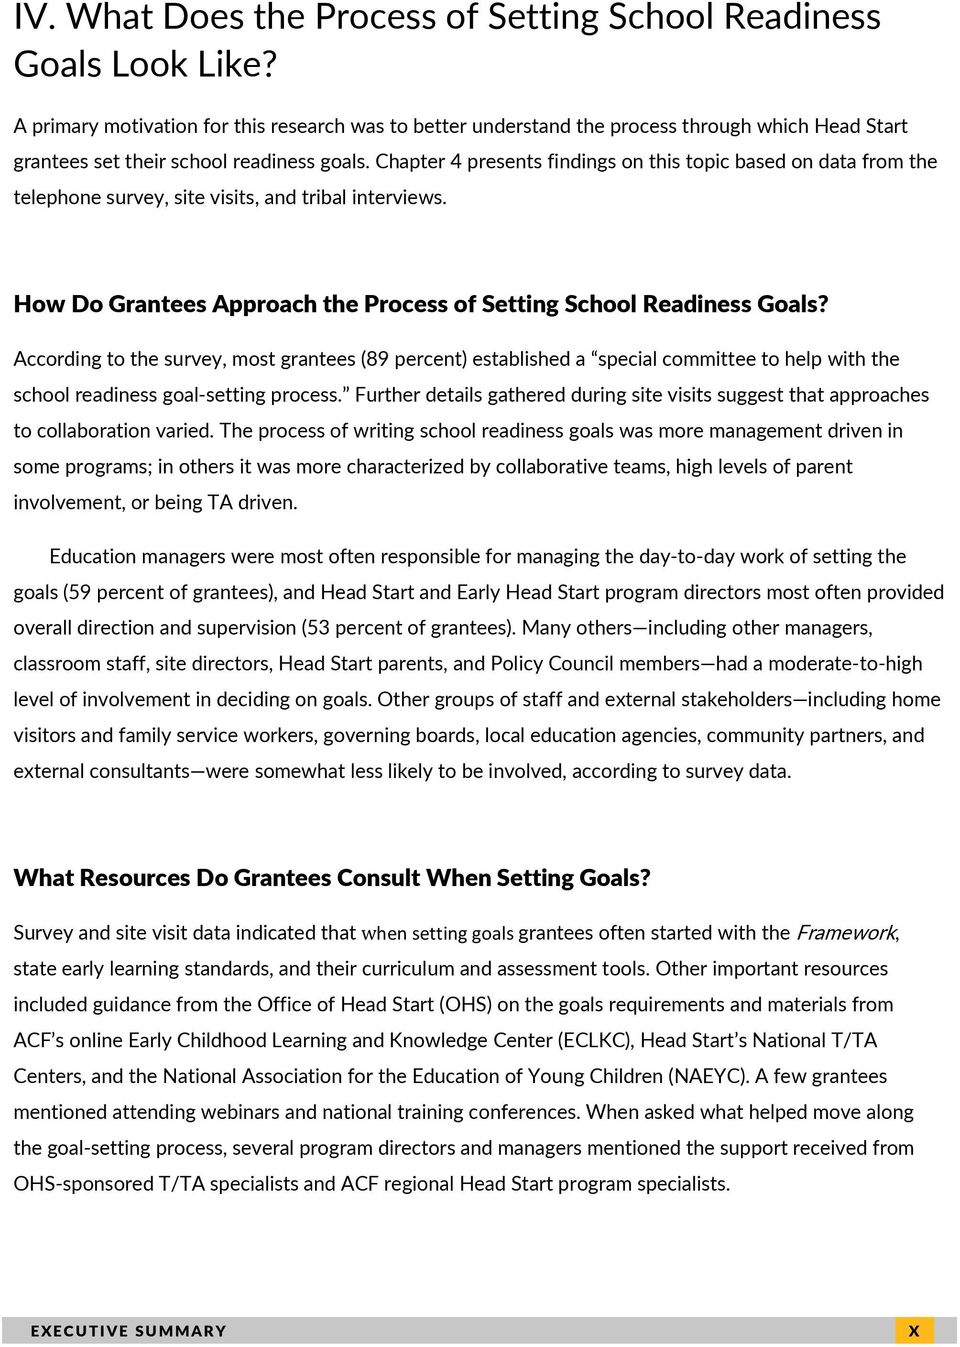 Chapter 4 presents findings on this topic based on data from the telephone survey, site visits, and tribal interviews. How Do Grantees Approach the Process of Setting School Readiness Goals?